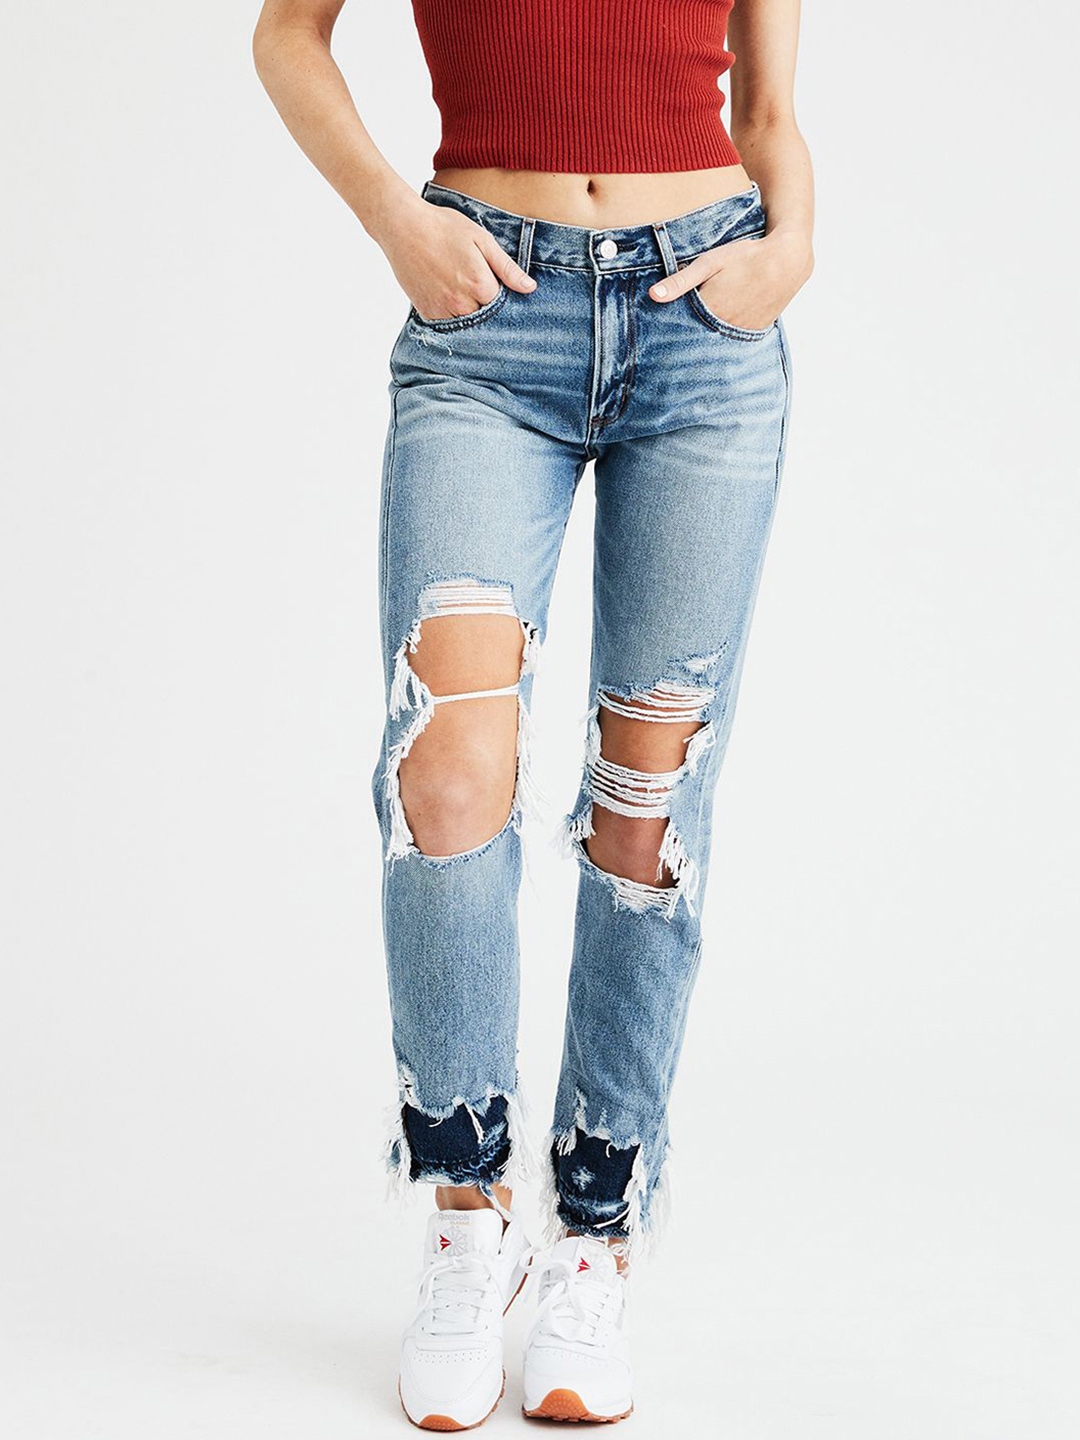 american eagle very ripped jeans